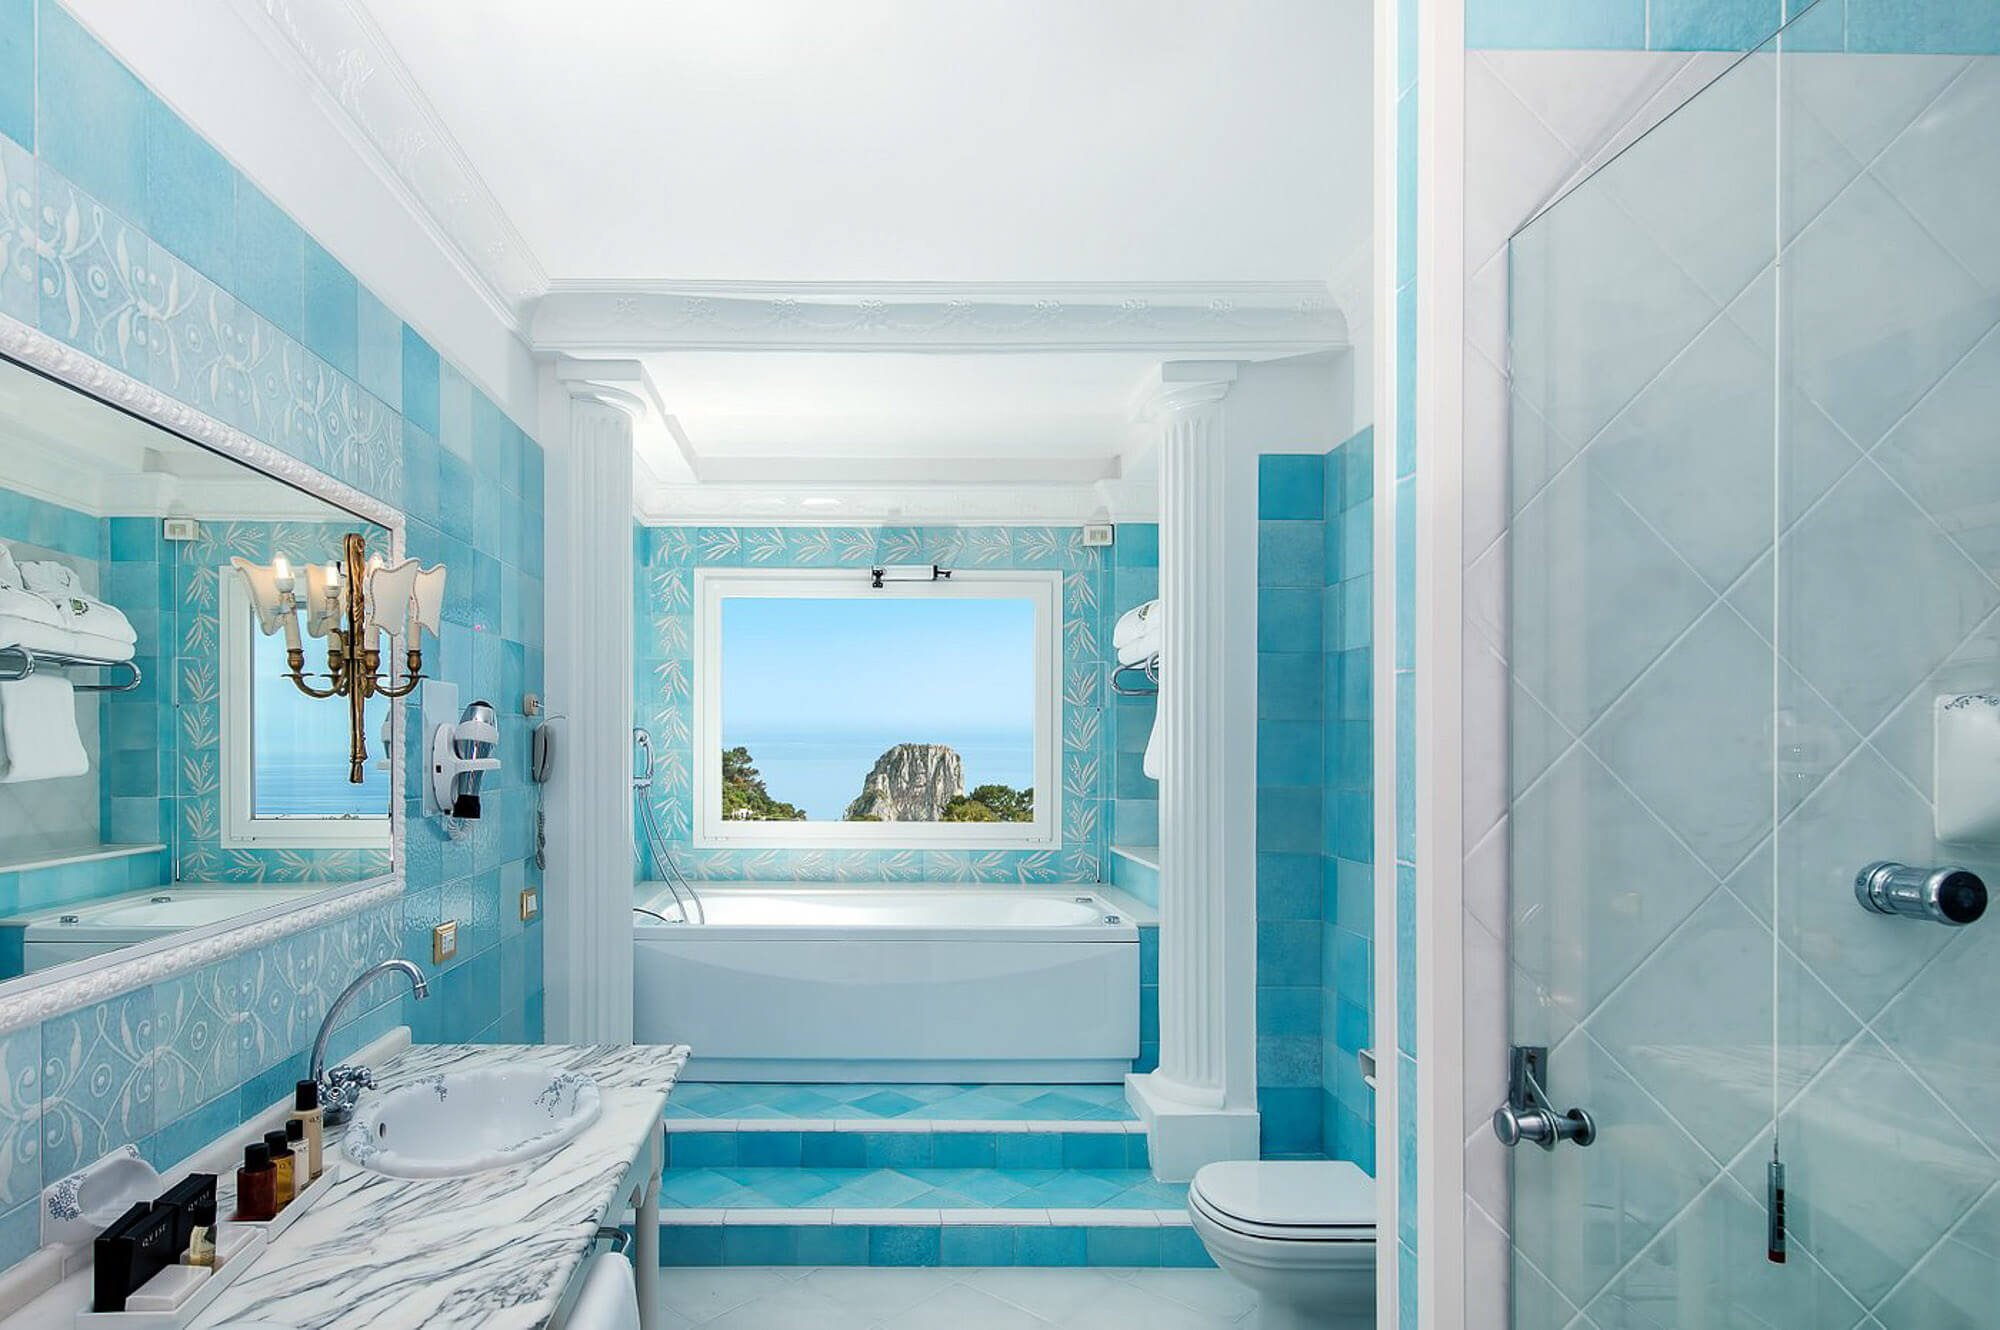 A bathroom view at luxury hotel Grand Hotel Quisisana, one of the best 5 star hotels in Capri Italy